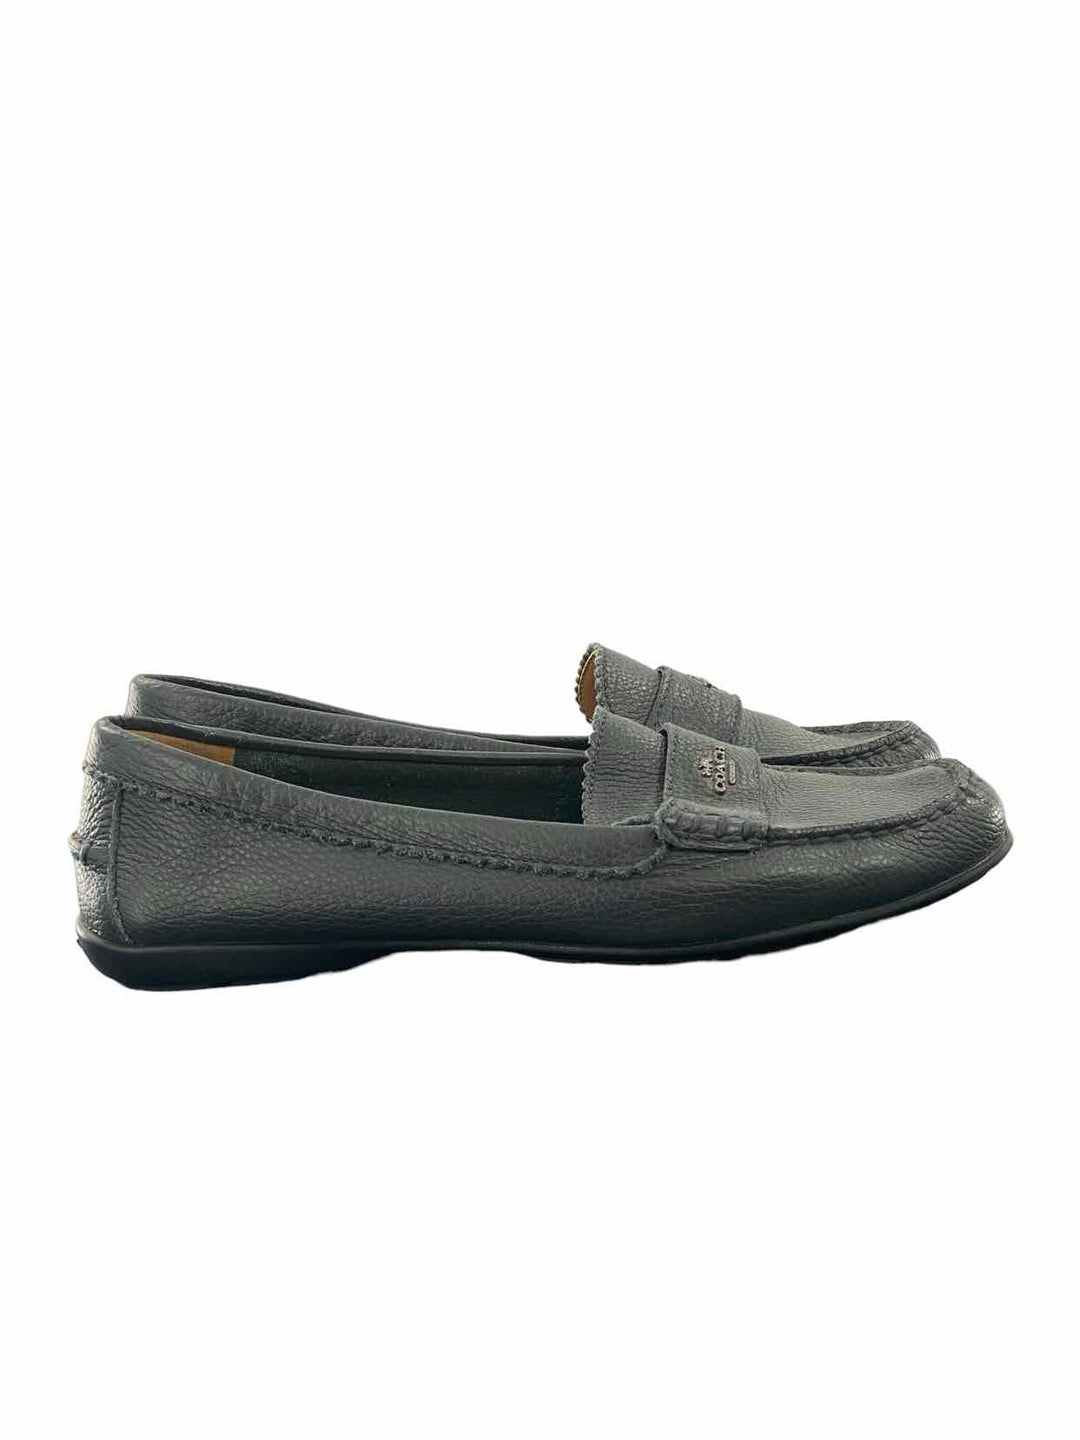 COACH Shoe Size 8.5 Navy Leather Loafers